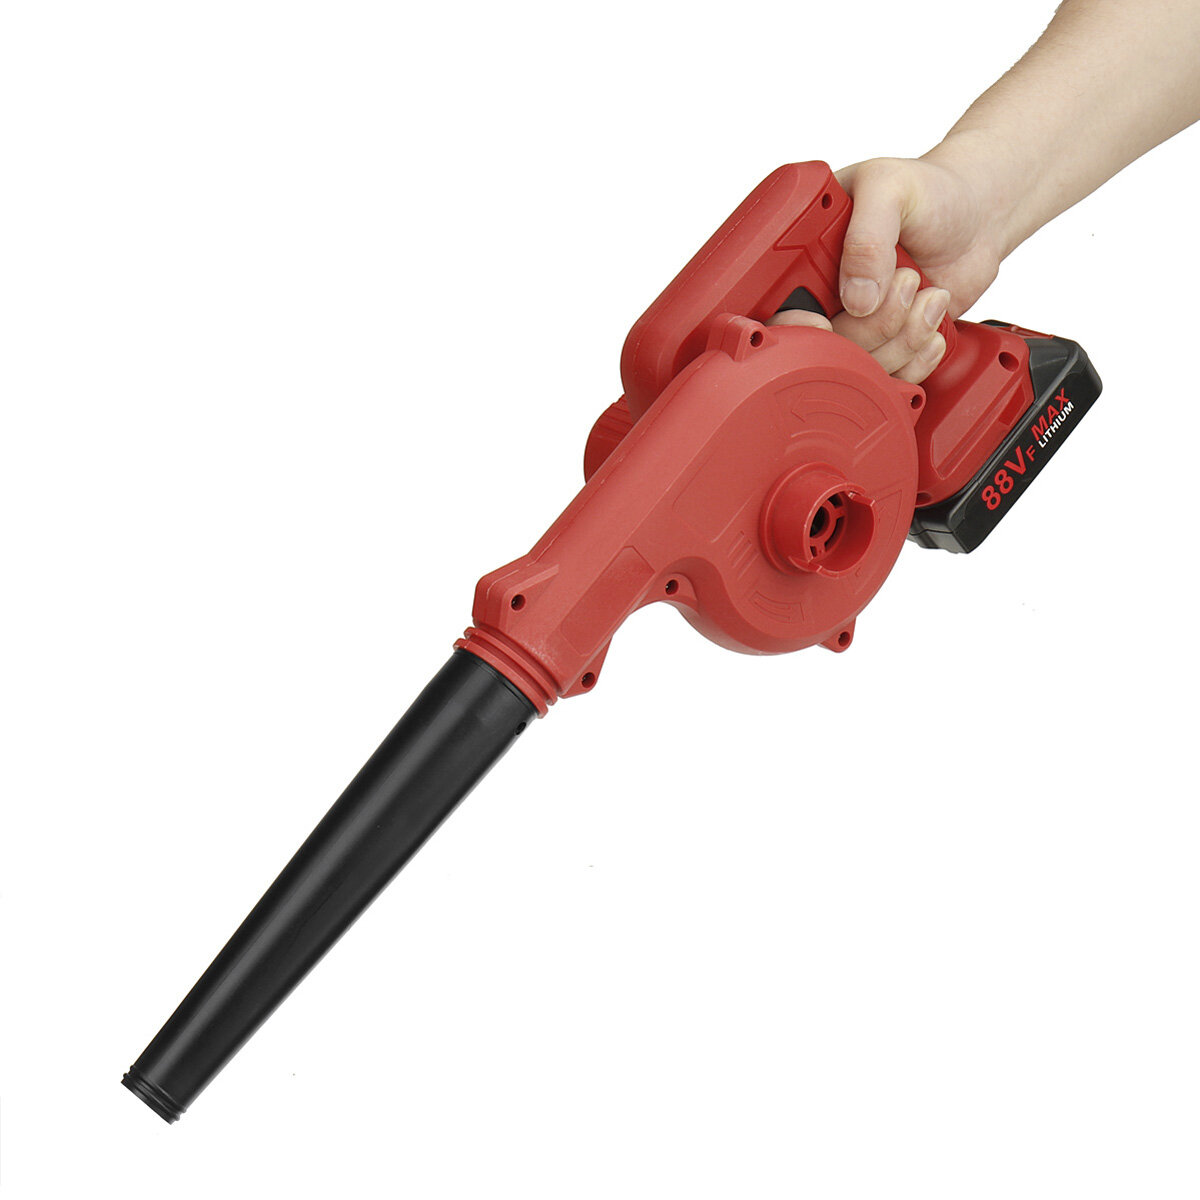 88VF Garden Cordless Air Blower Vacuum Cleaner Blower For Dust Blowing W/ None/1/2pcs Battery Also for Makita 18V Batter